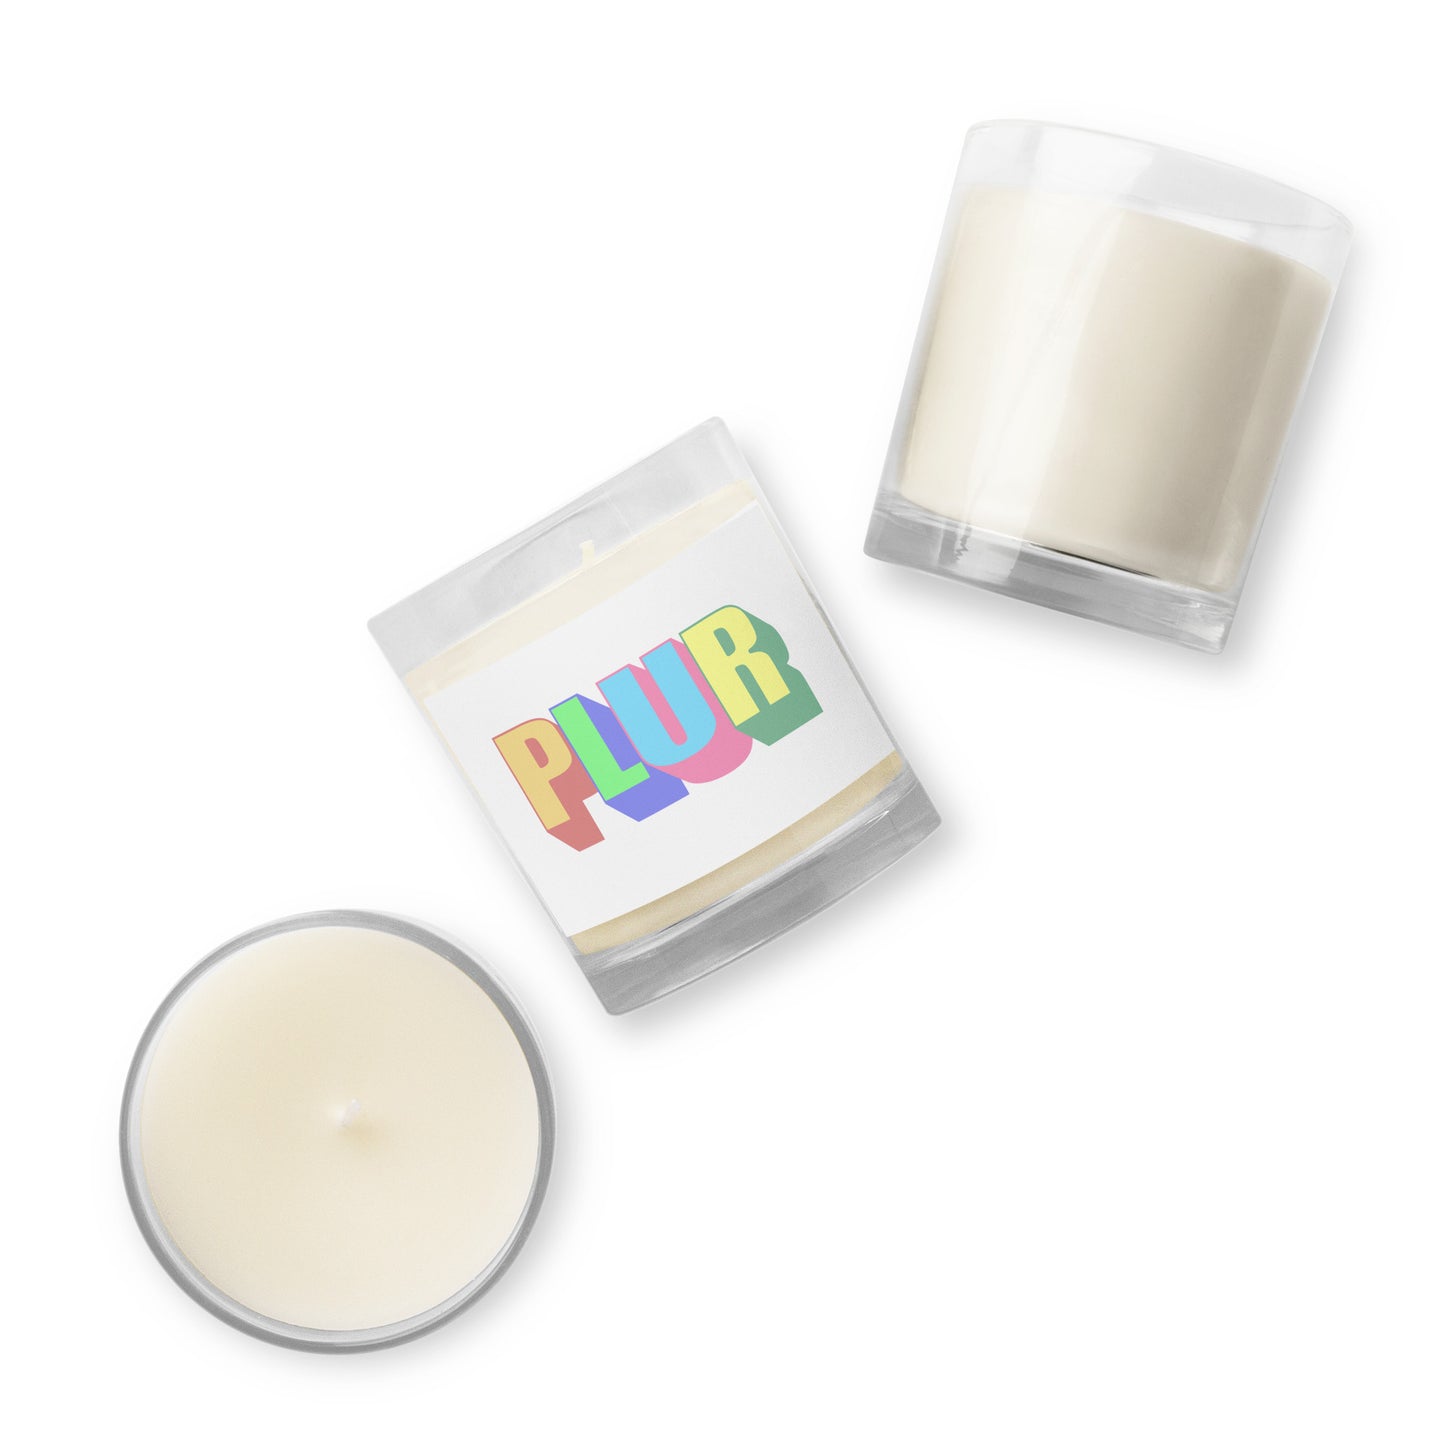 PLUR CANDLE Glass jar soy wax candle